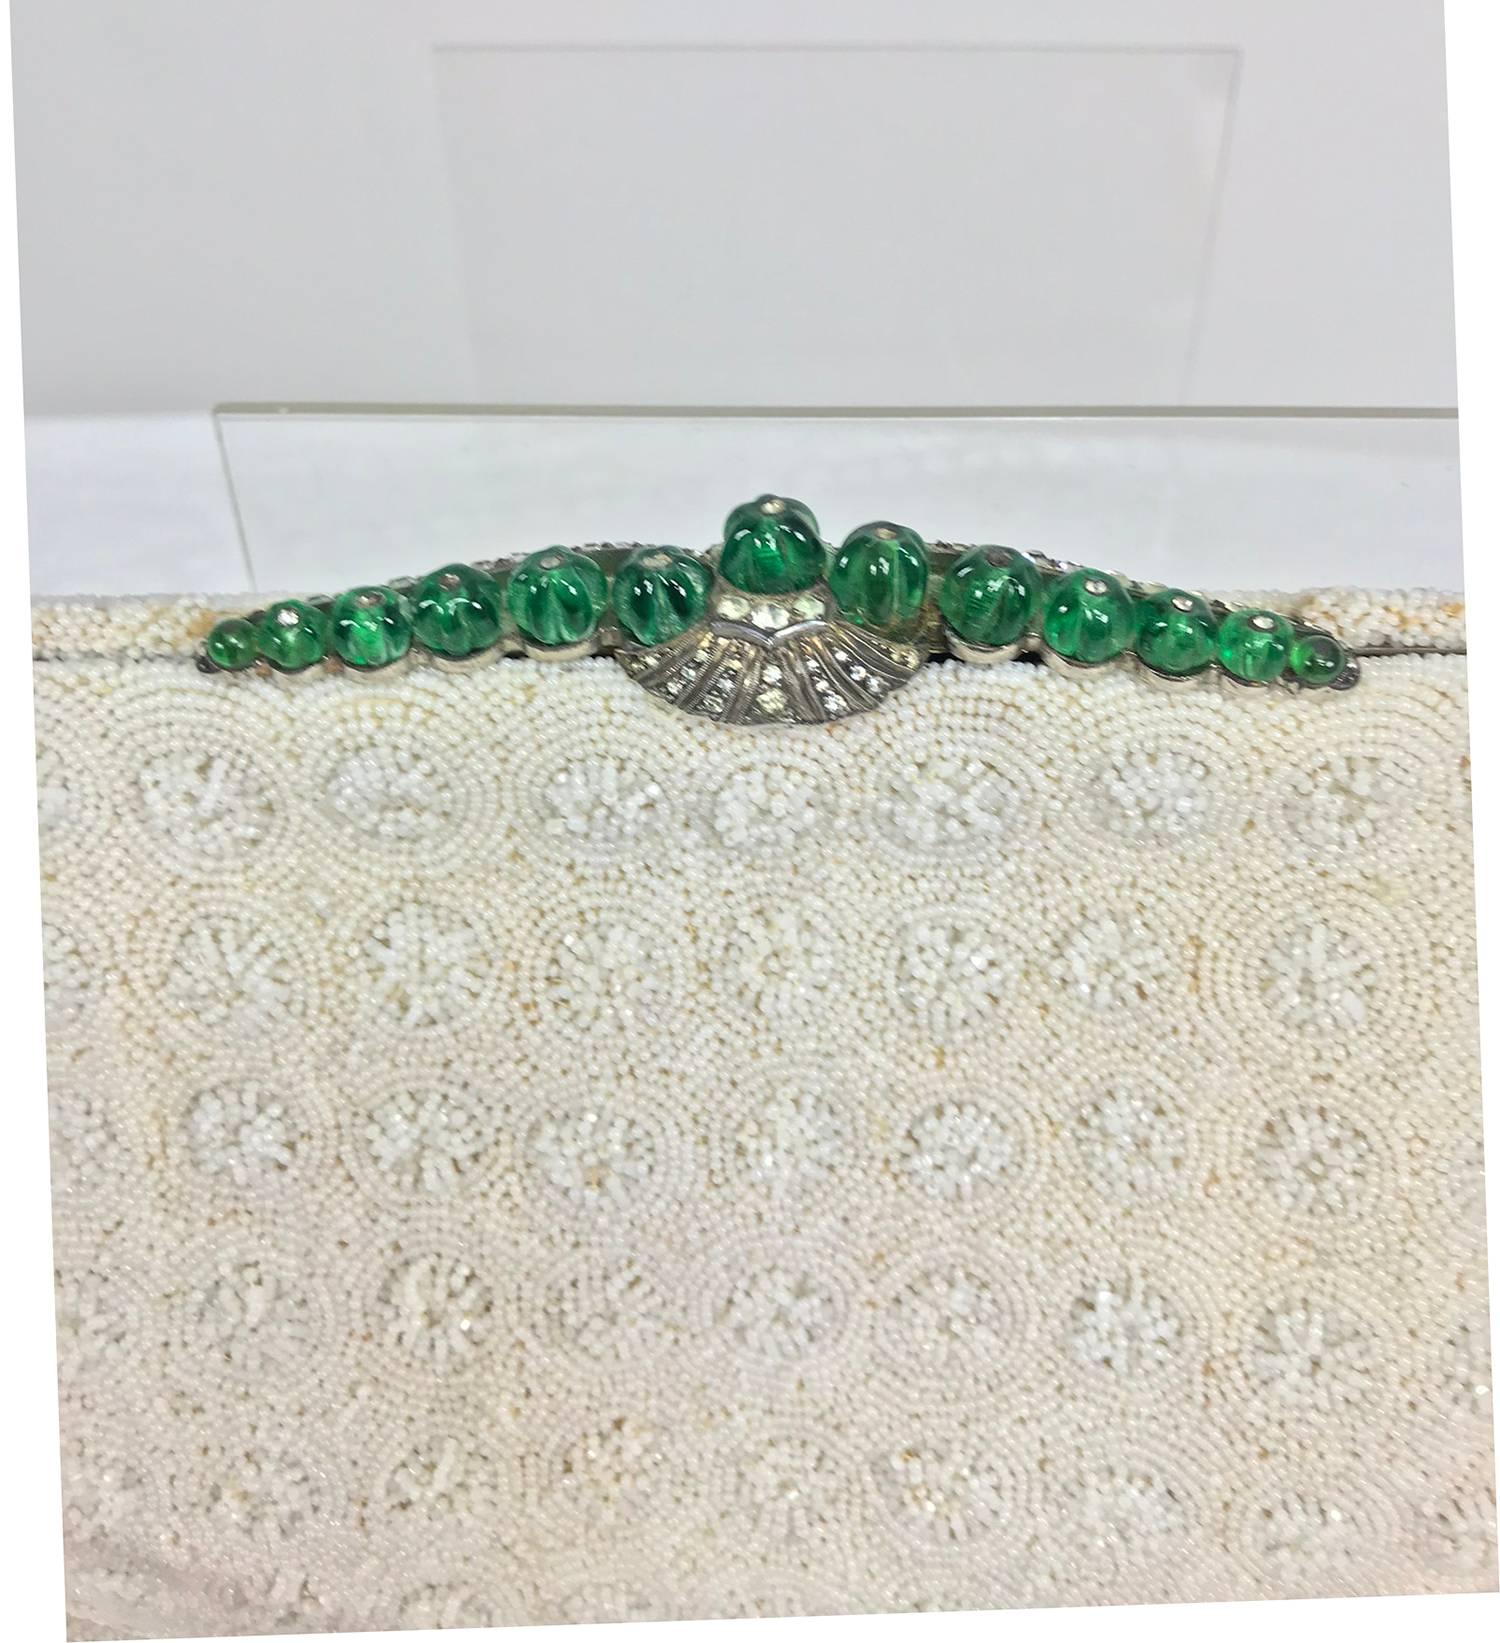 Marguerite Fresse Paris jewel frame white beaded evening bag...Classic 1950s evening bag, the frame is silver metal with a clasp that features rhinestones and round emerald colour carved beads...The bag has circles of snowflakes all done in tiny